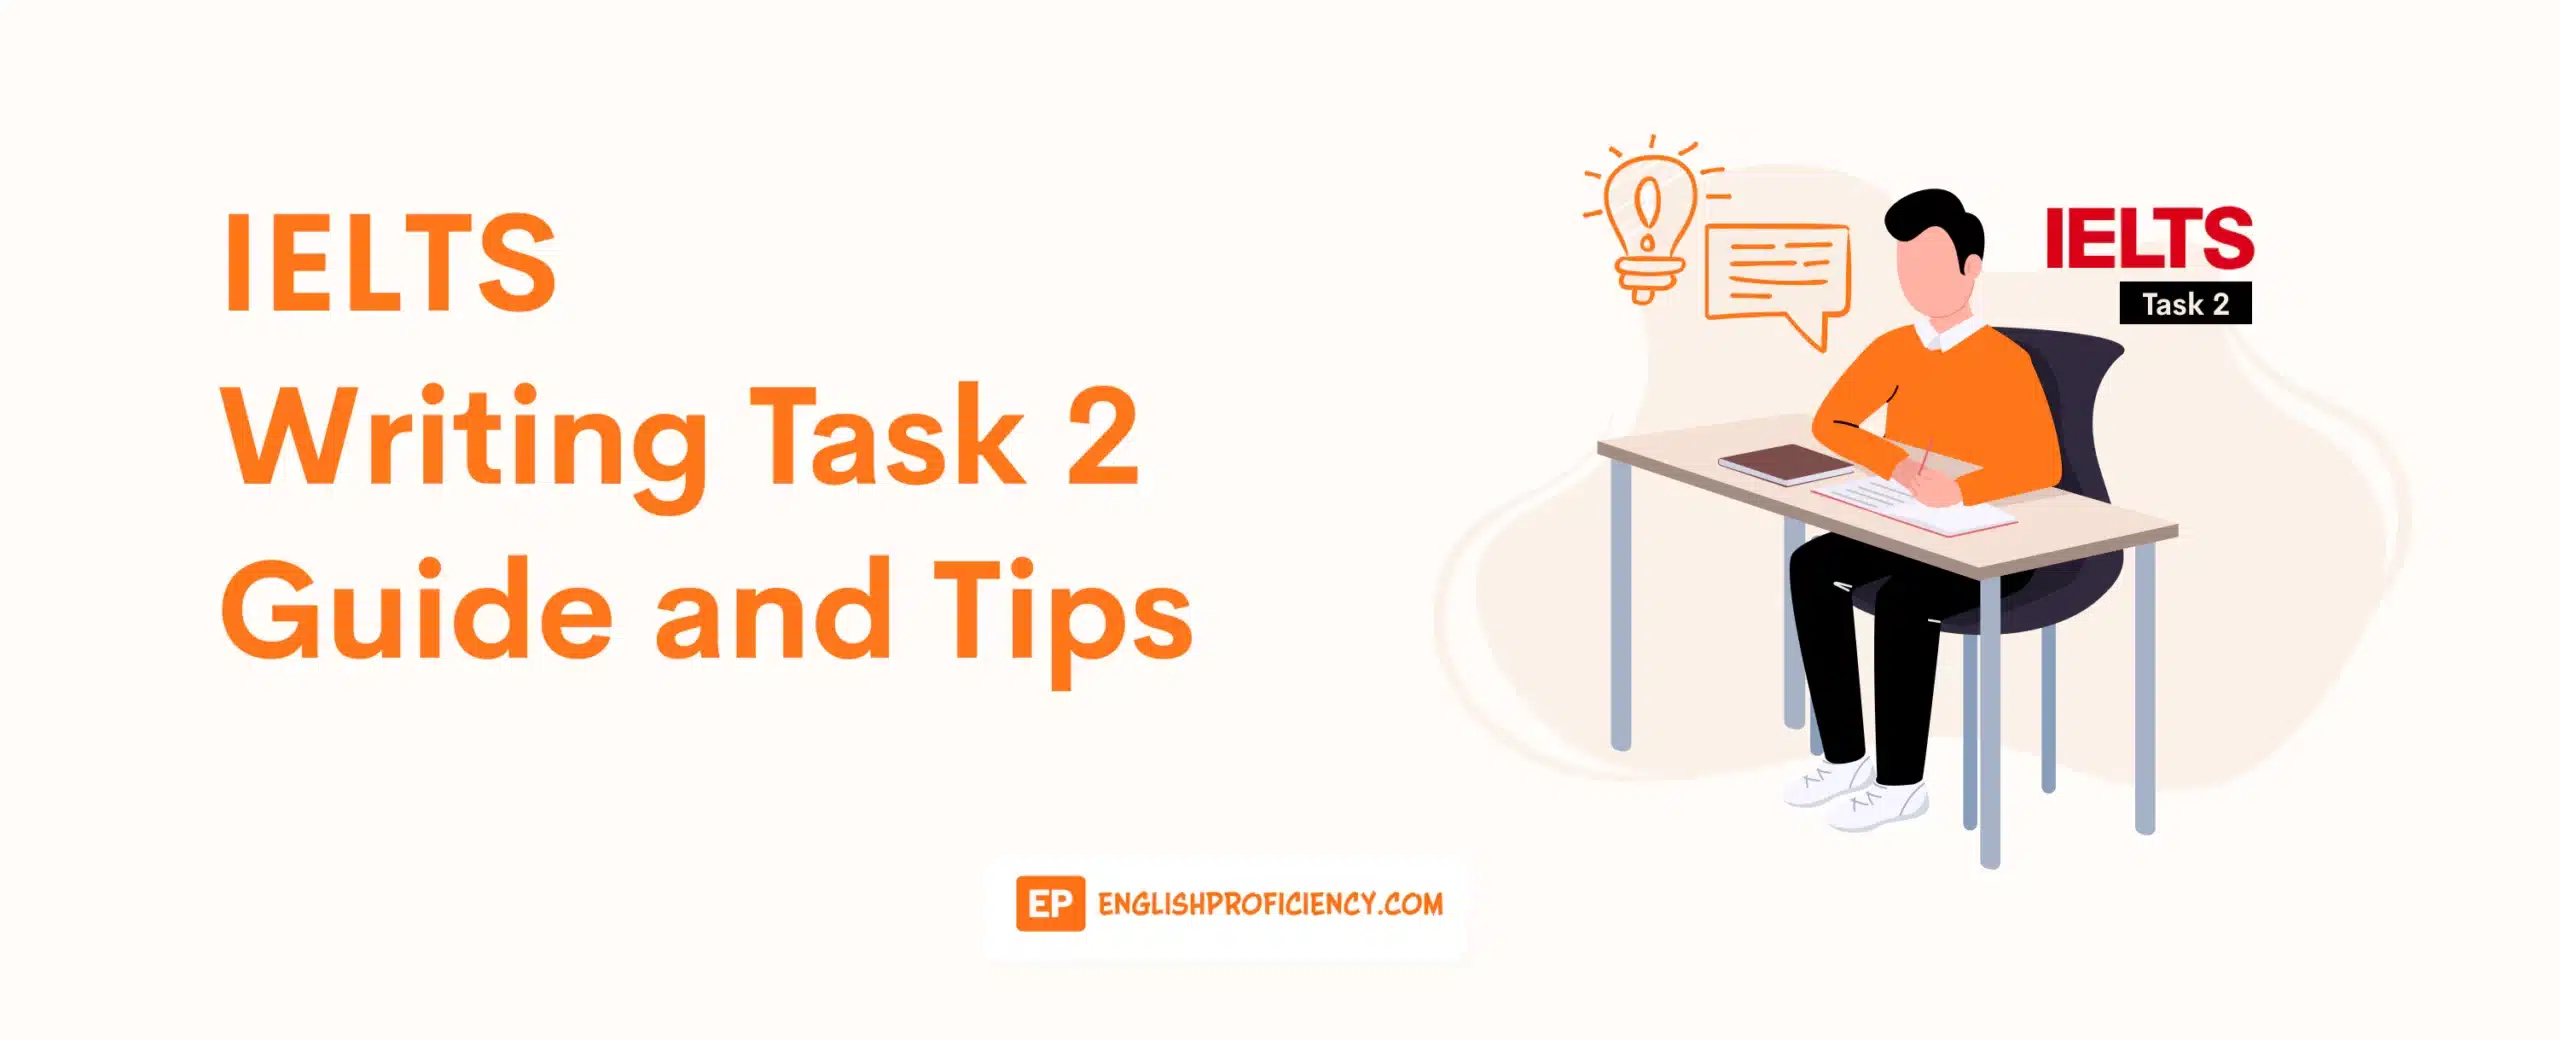 IELTS Writing Task 2 Guide and Tips